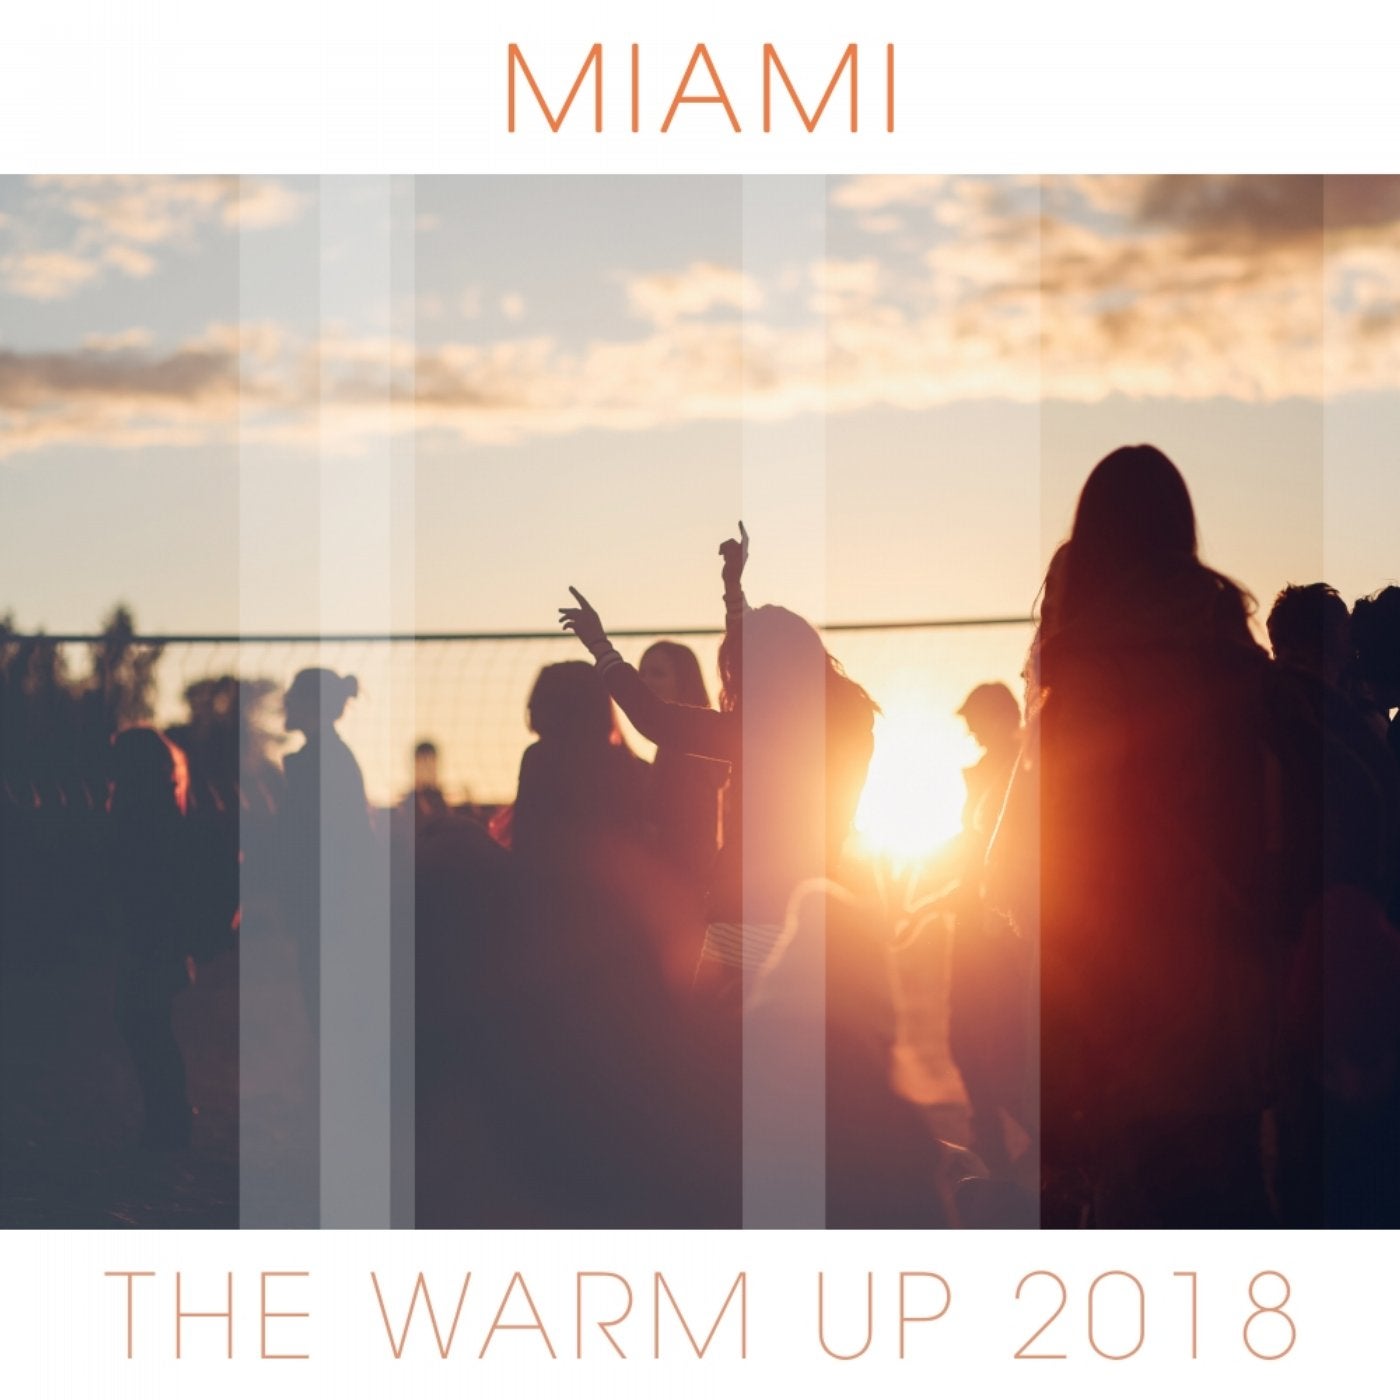 Miami: The Warm Up 2018